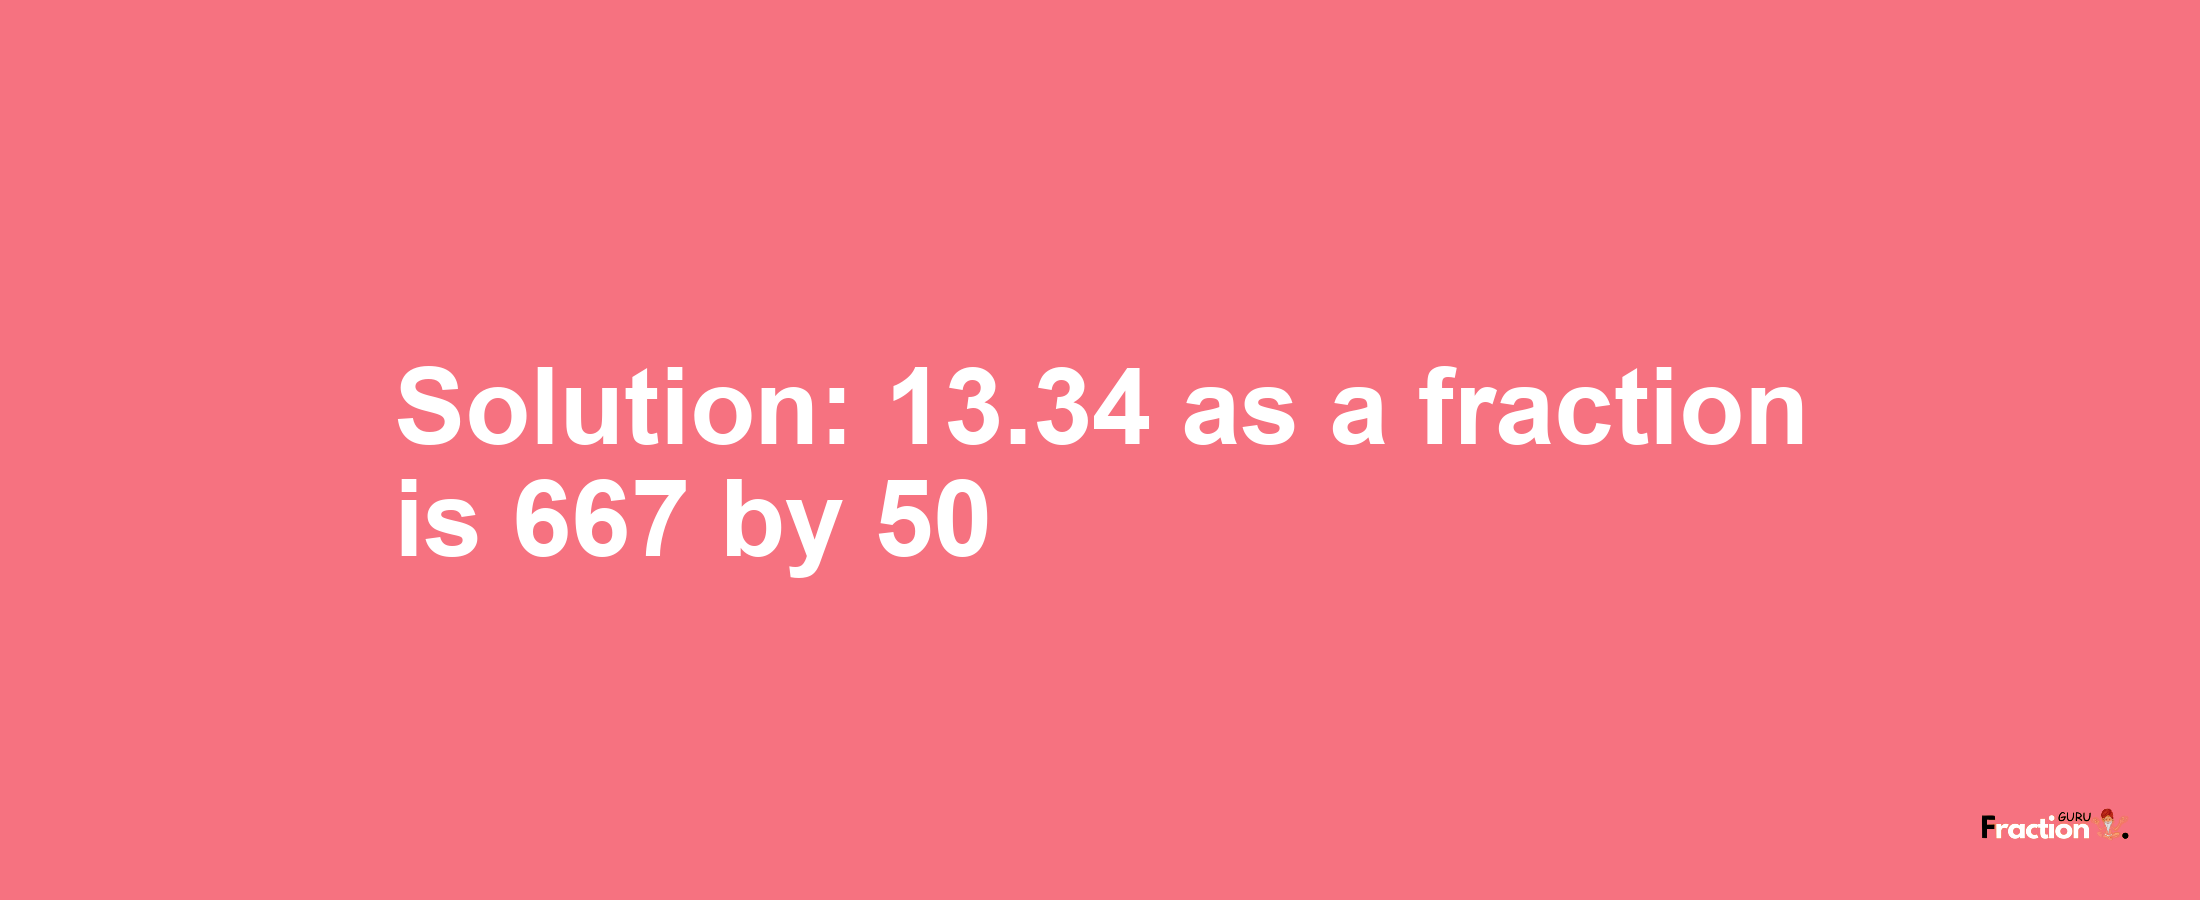 Solution:13.34 as a fraction is 667/50